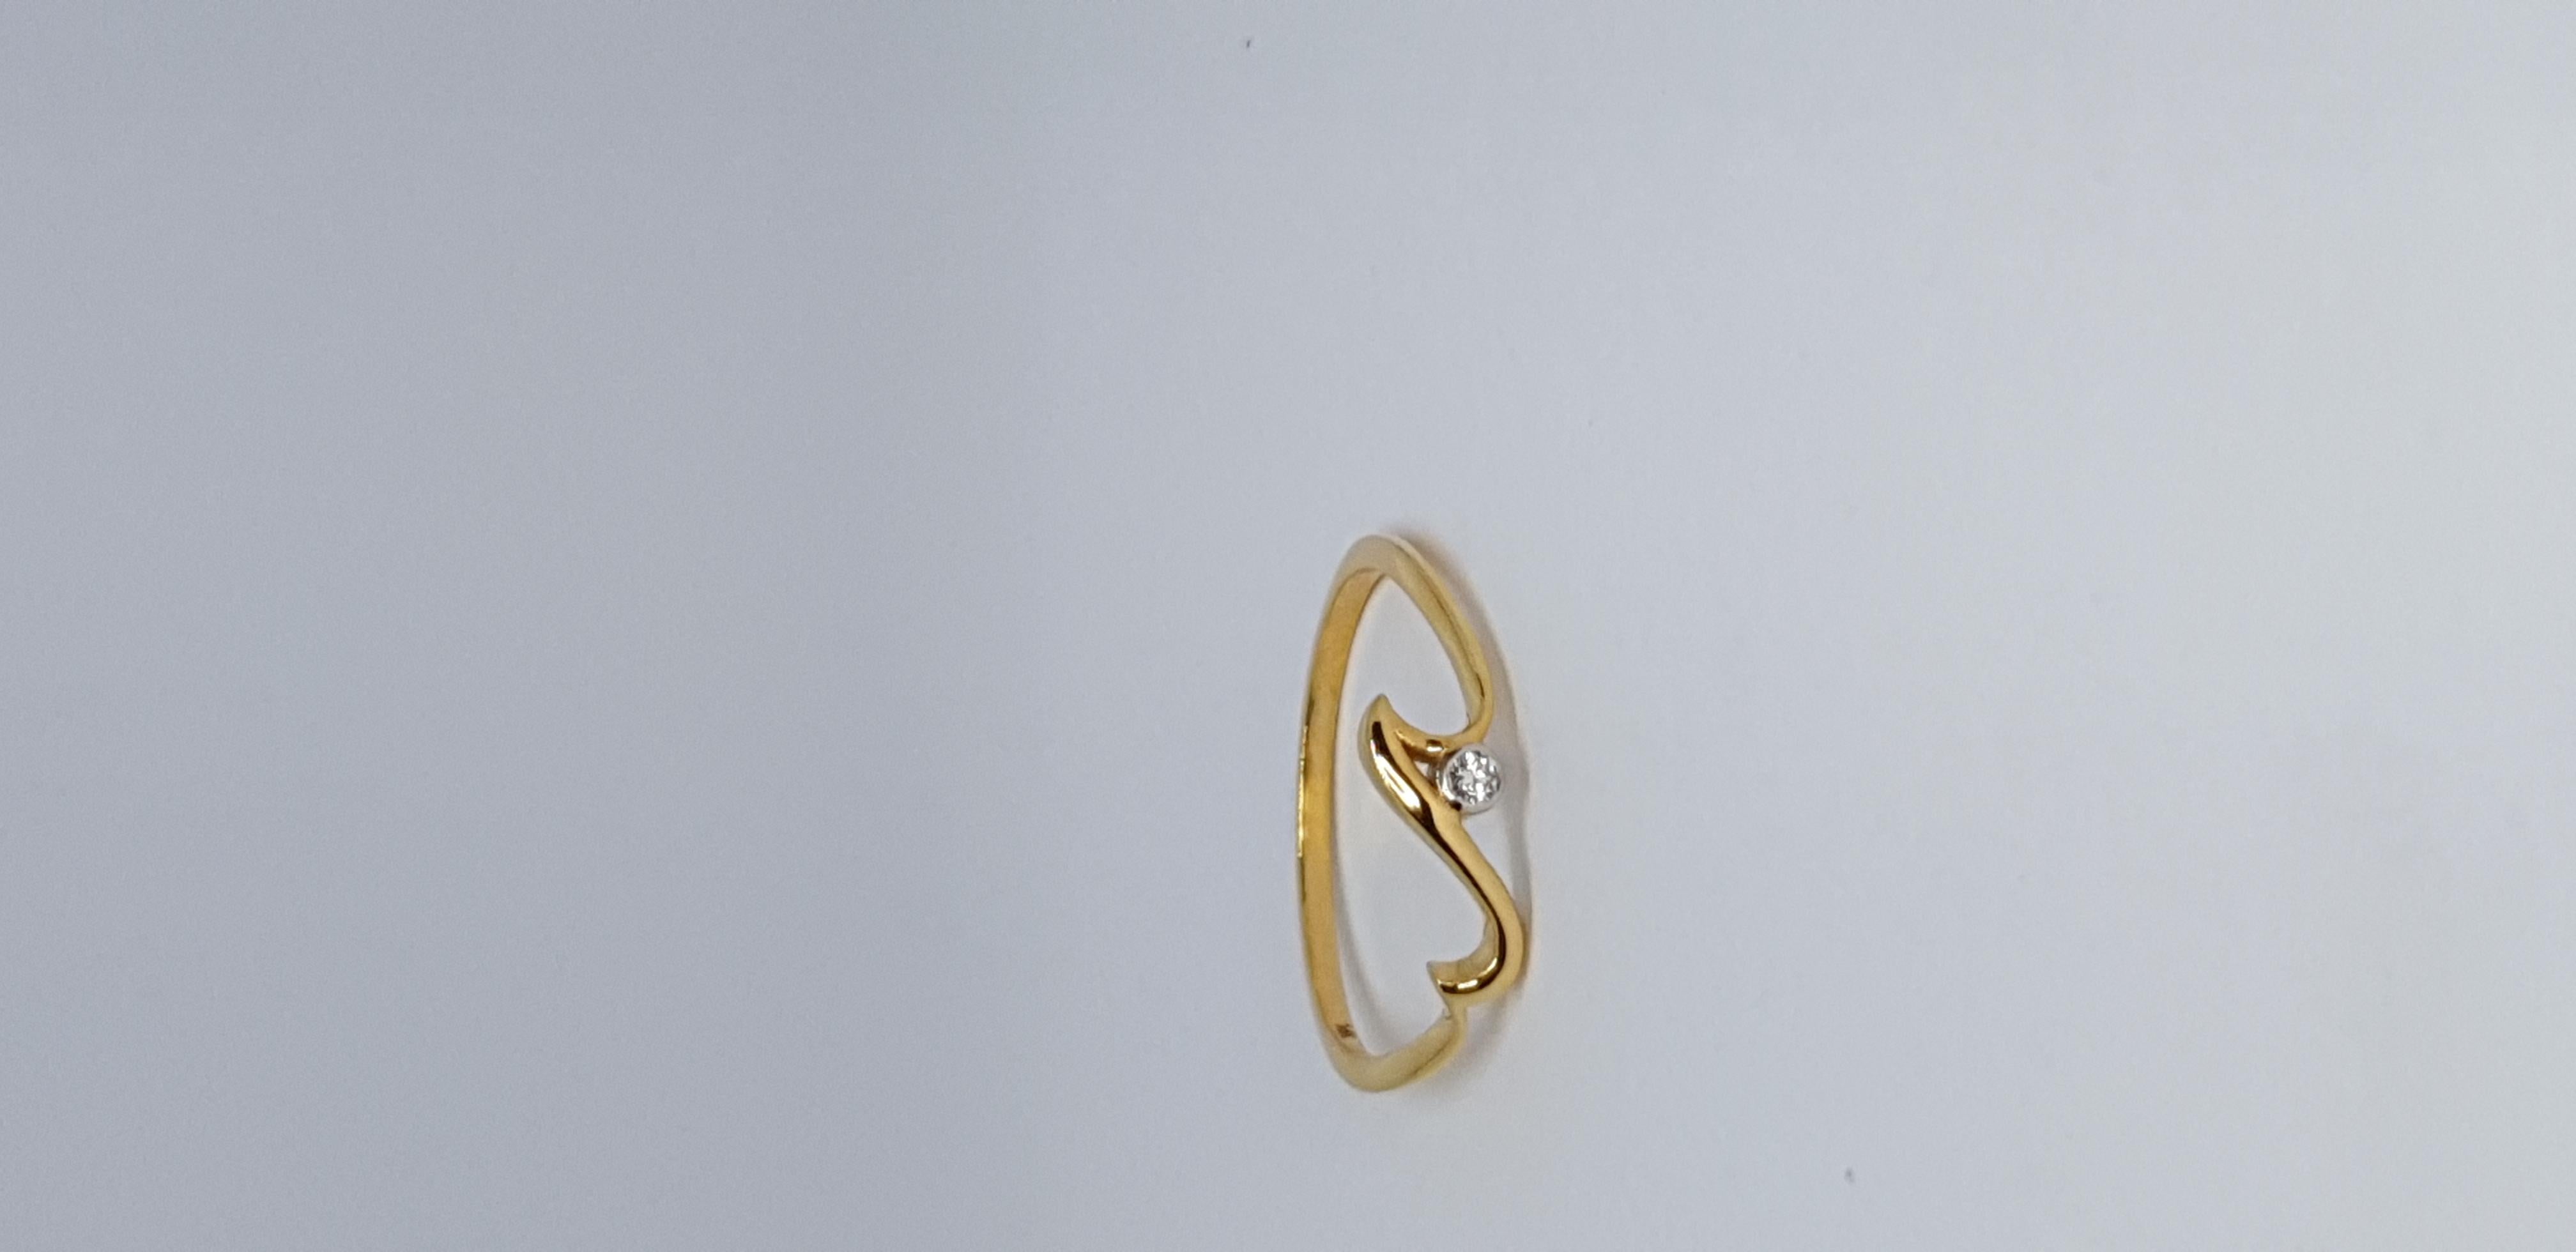 For Sale:  Natural Diamond Wave Ring 14K Solid Gold Dainty Ocean Lover Jewelry Gift. 7